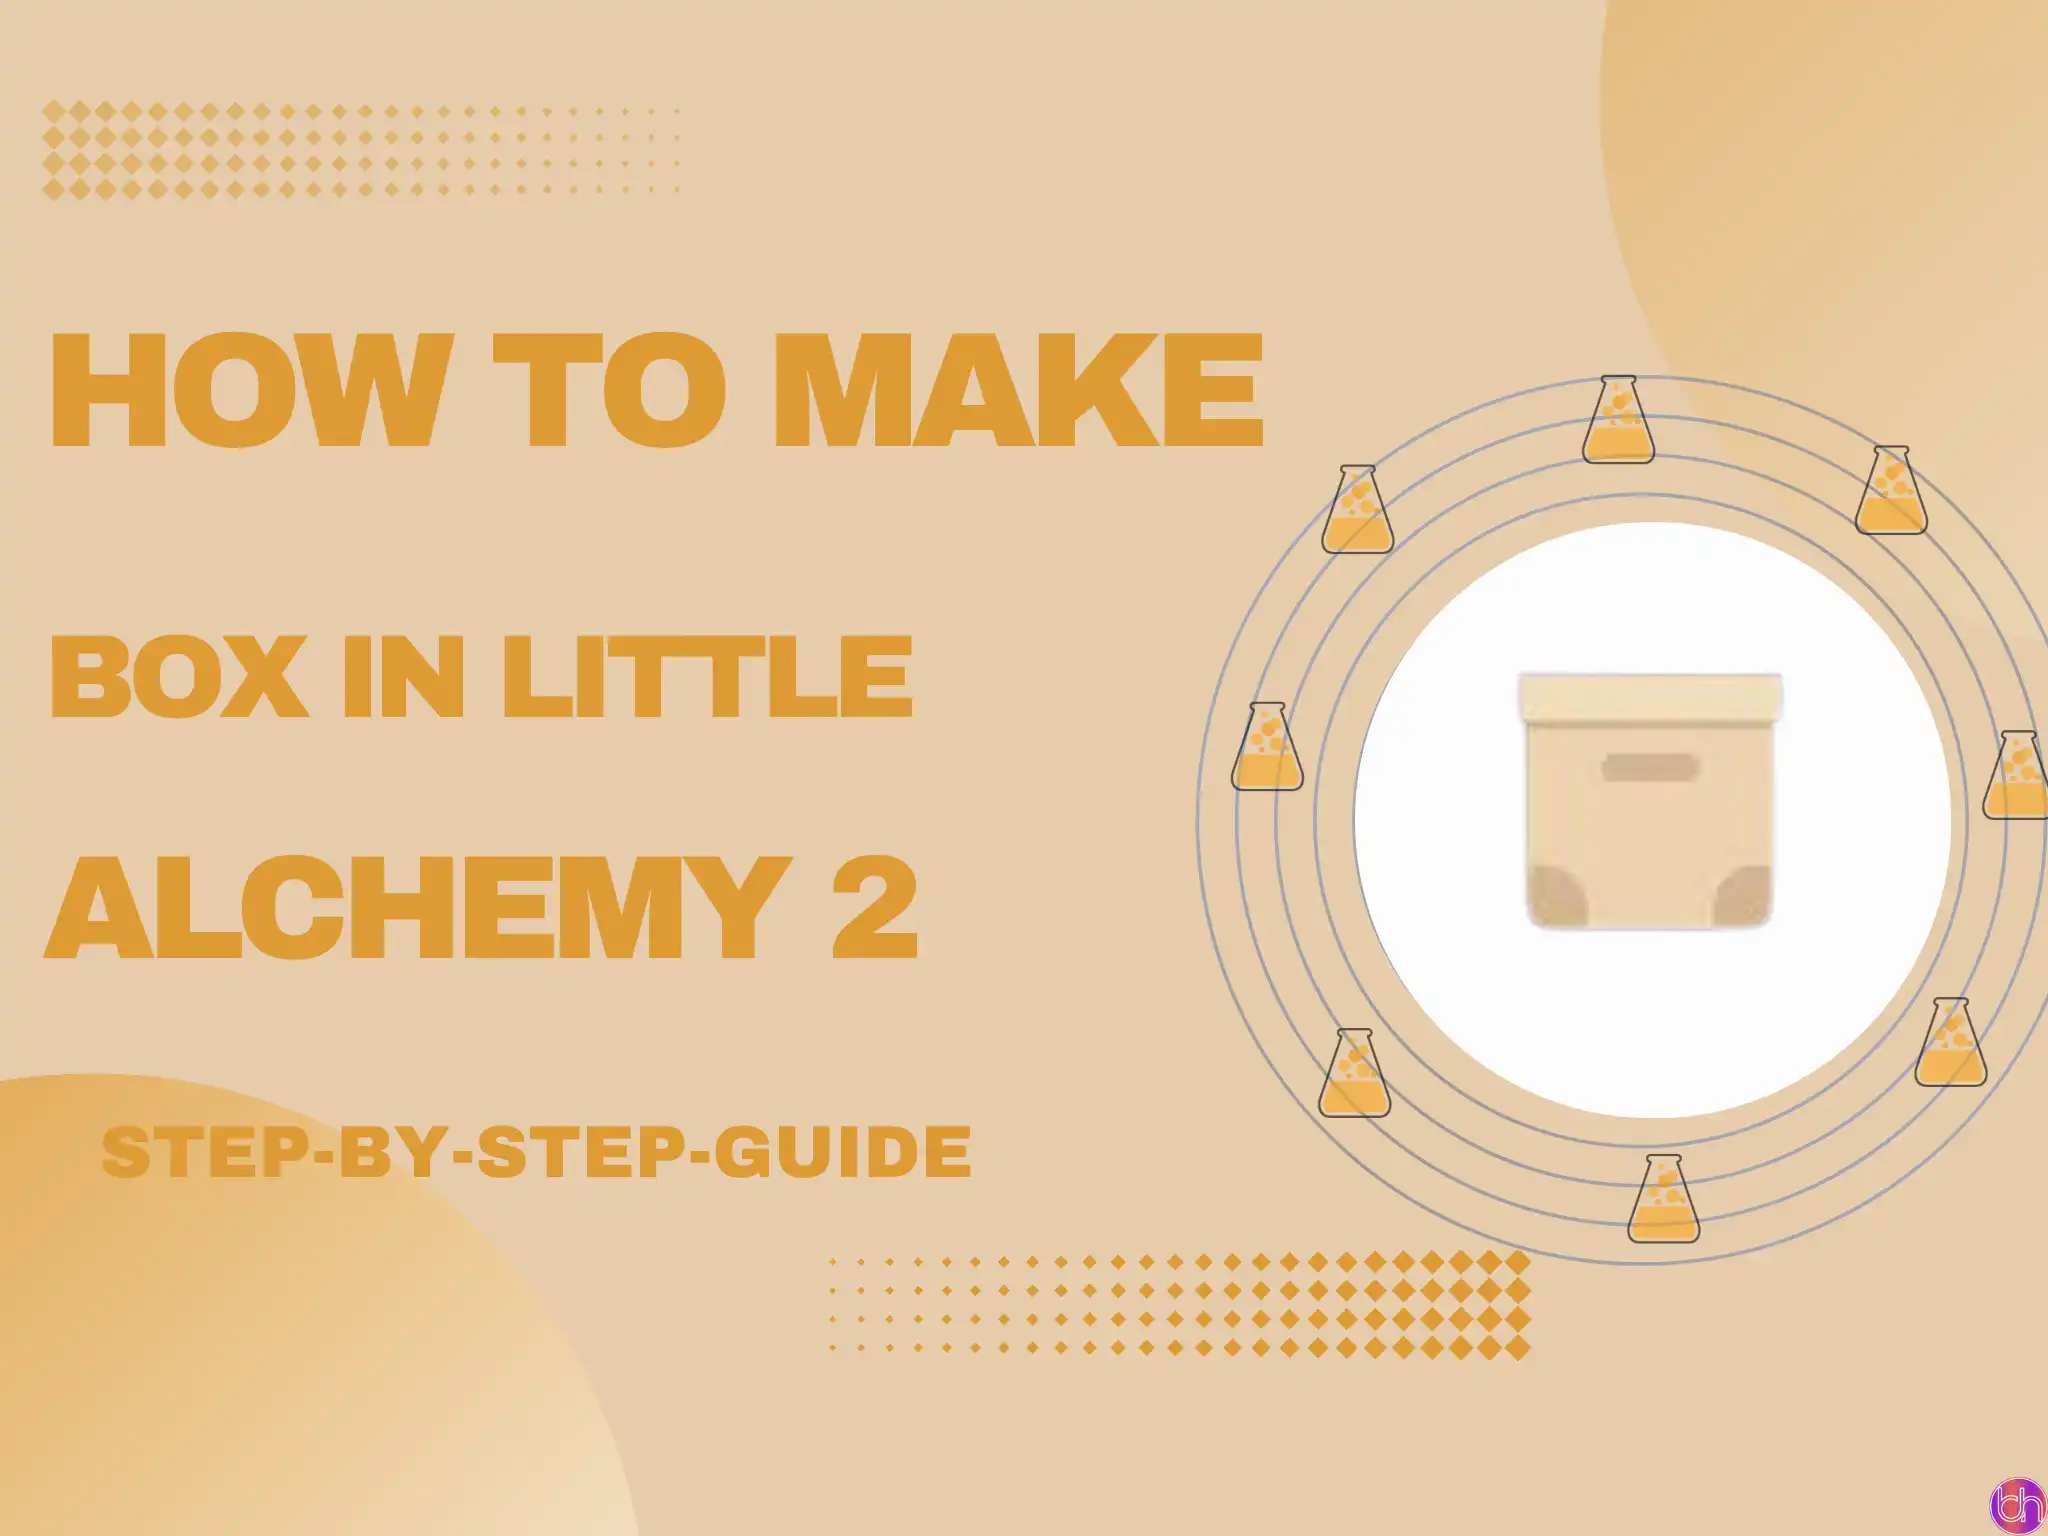 How to make Box in Little Alchemy 2